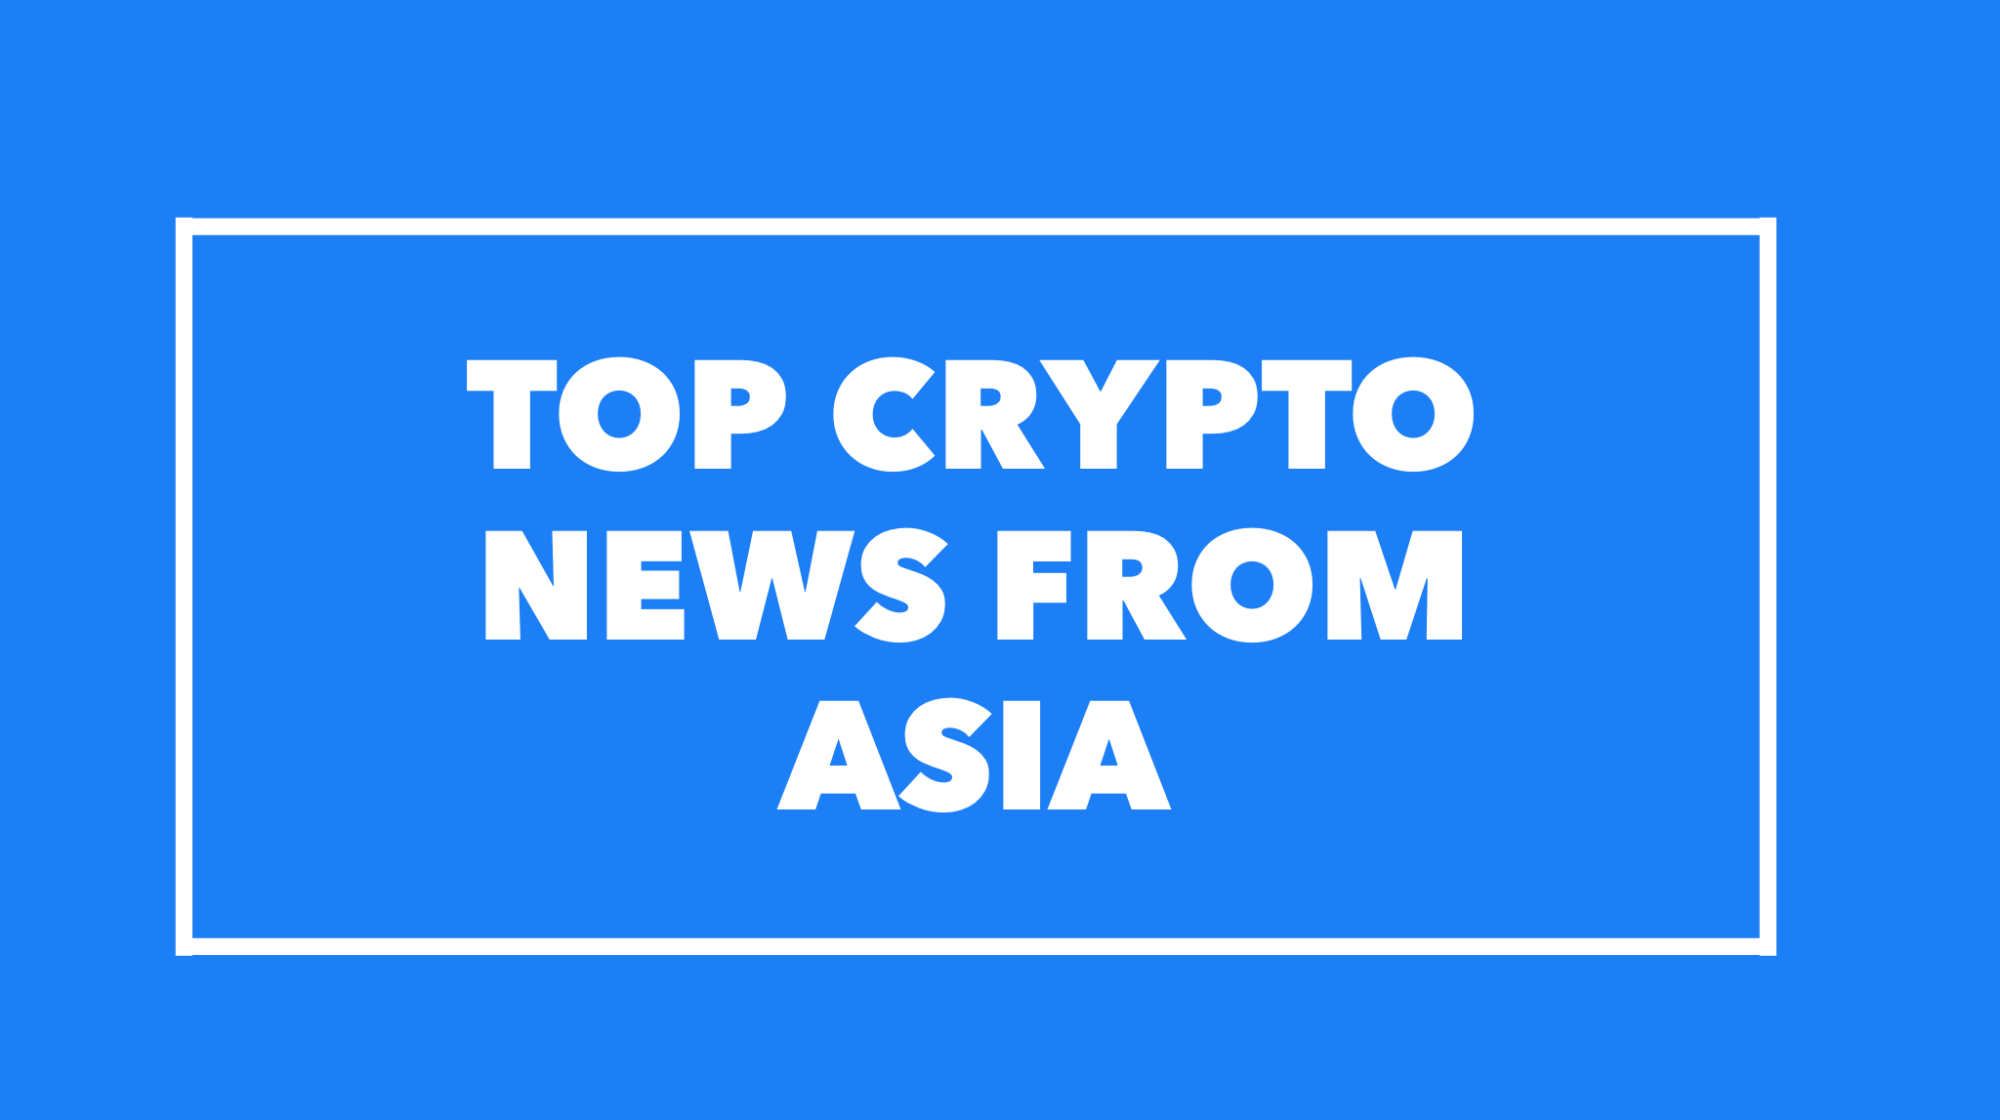 Top Crypto News in Asia from Sept 5th- Sept 8th